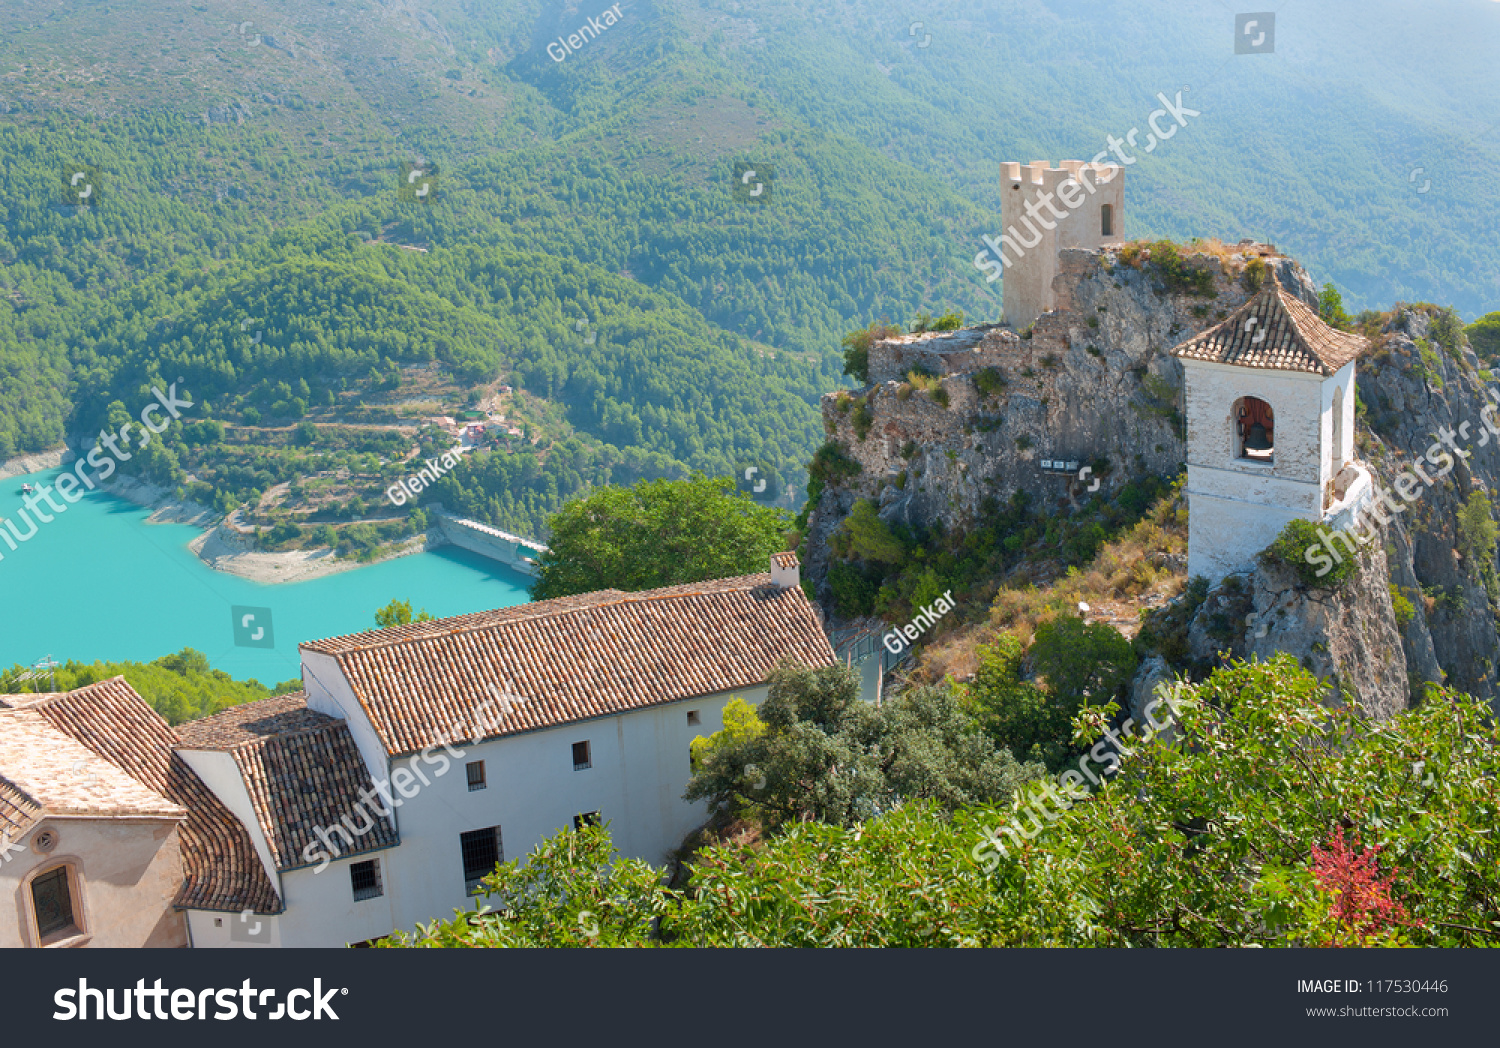 The famous Bell Tower and Gateway at Guadalest near Benidorm in Spain, horizontal #117530446